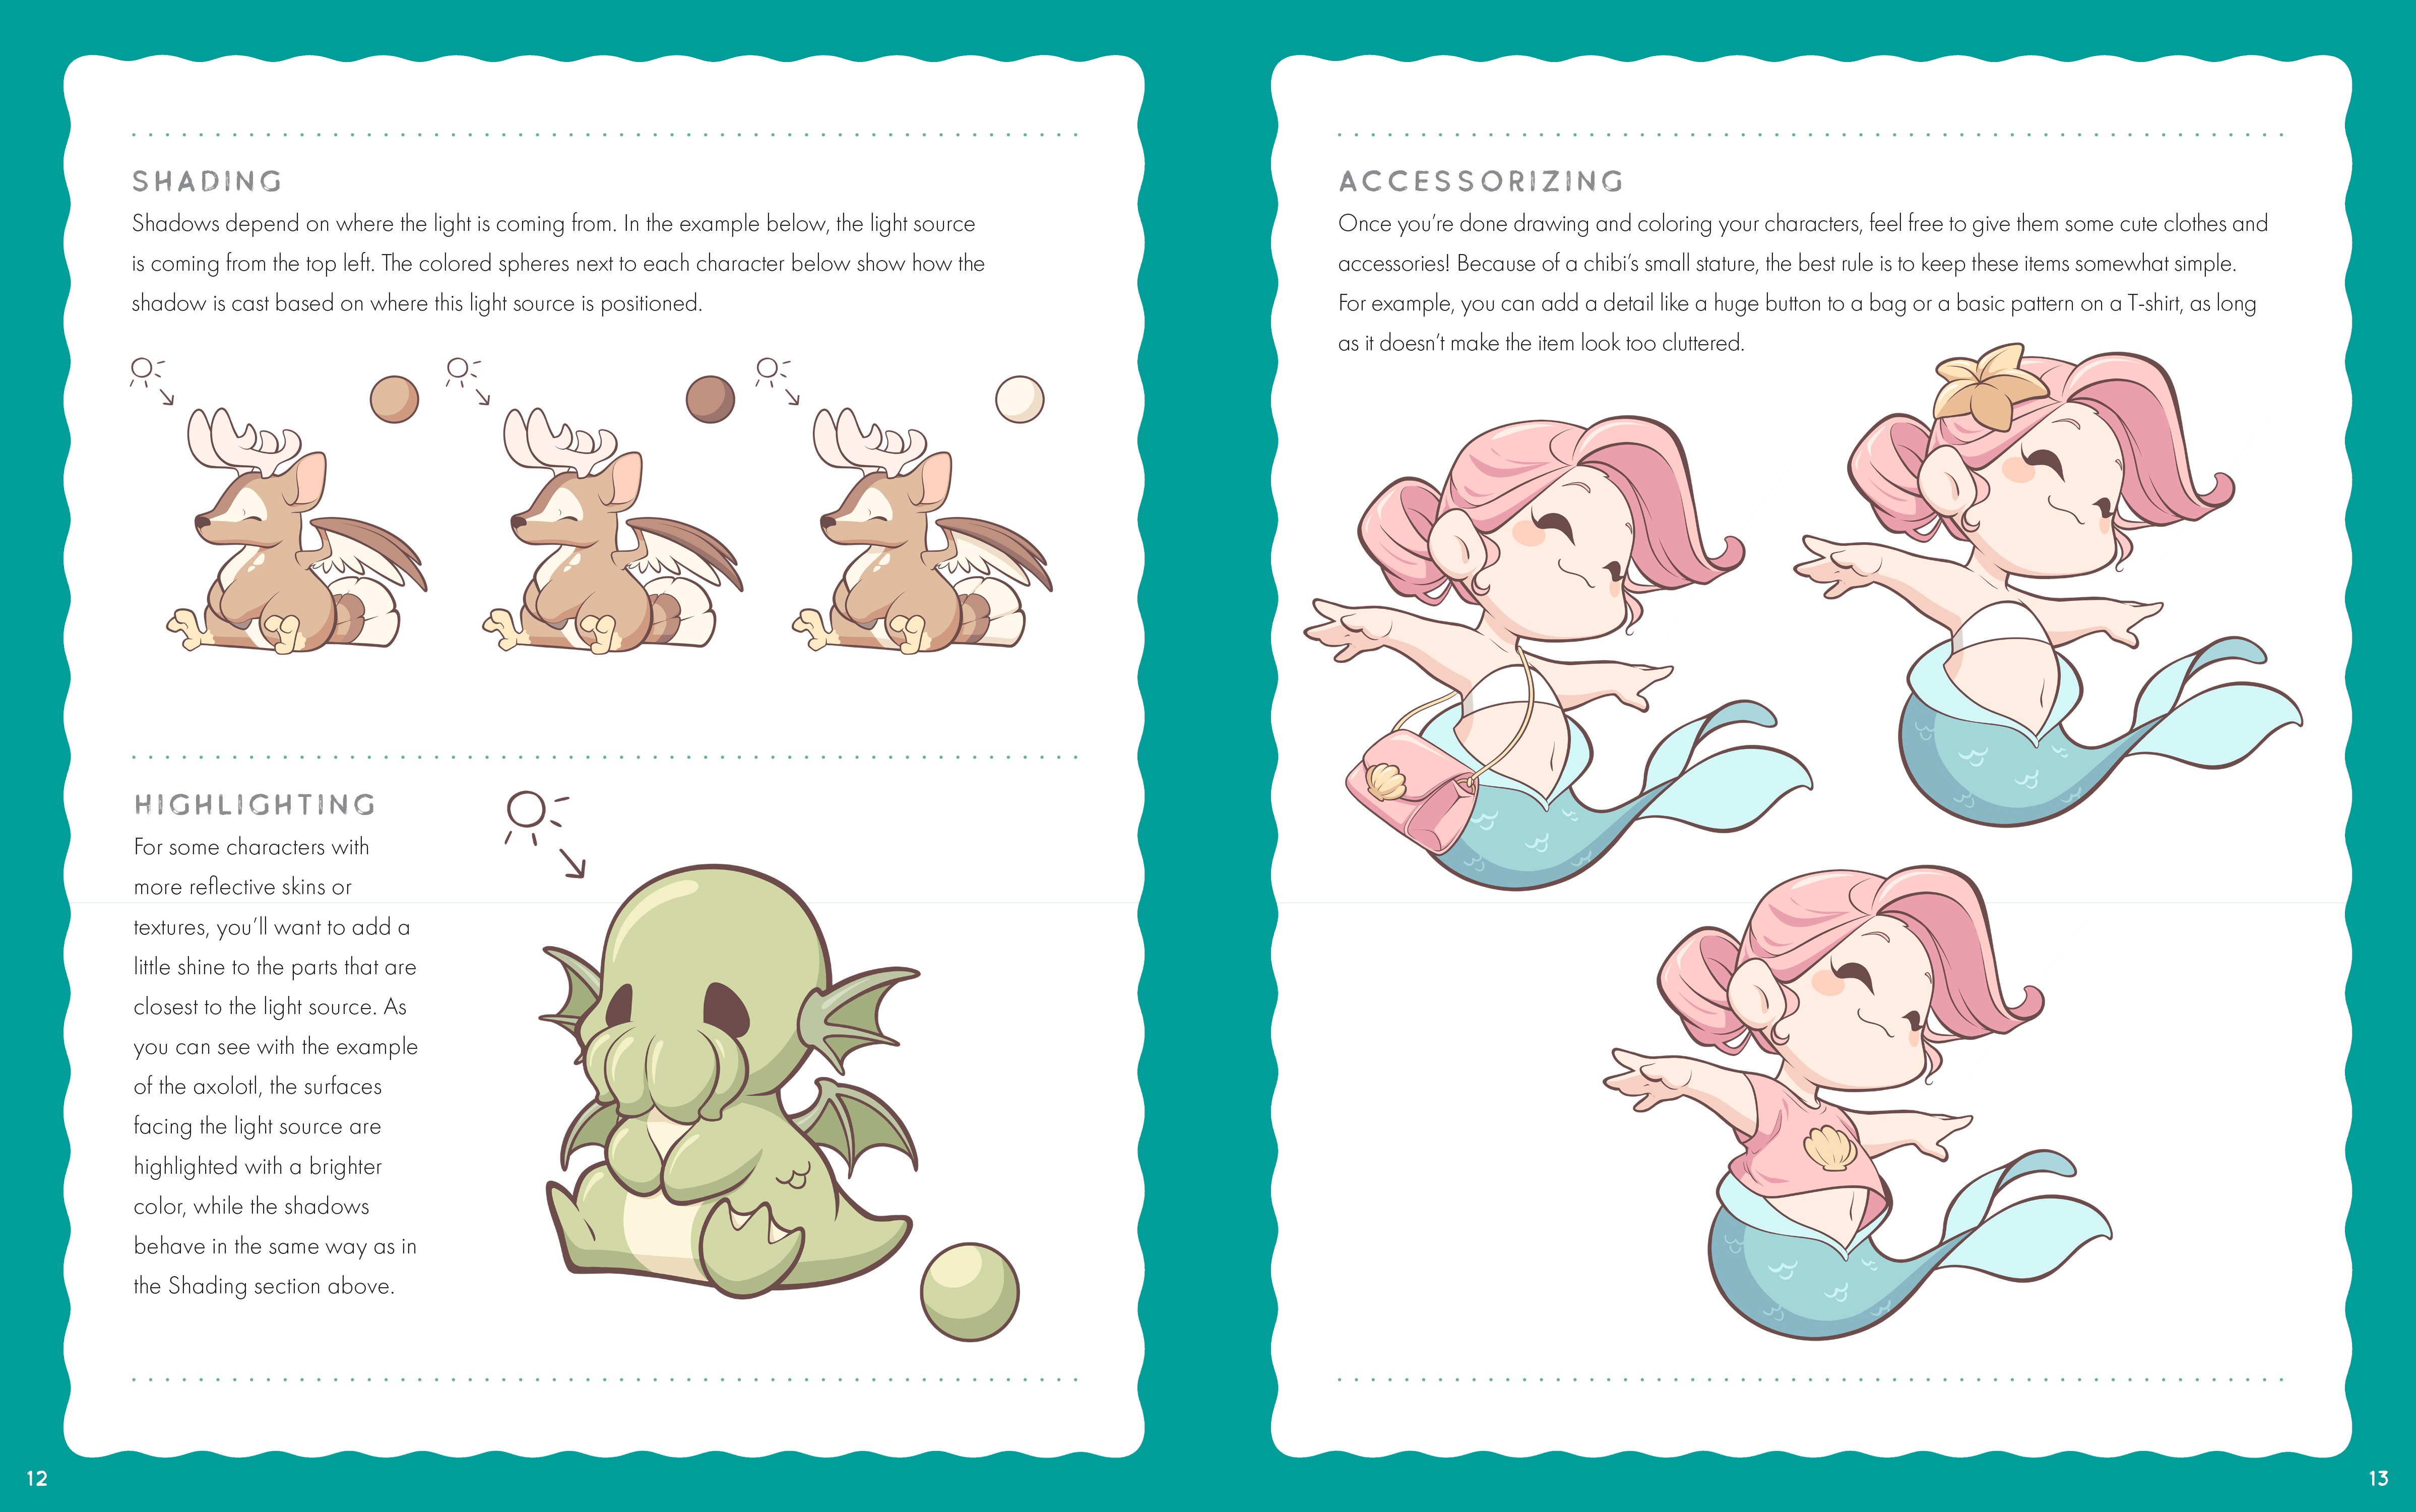 Cute Chibi Mythical Beasts & Magical Monsters